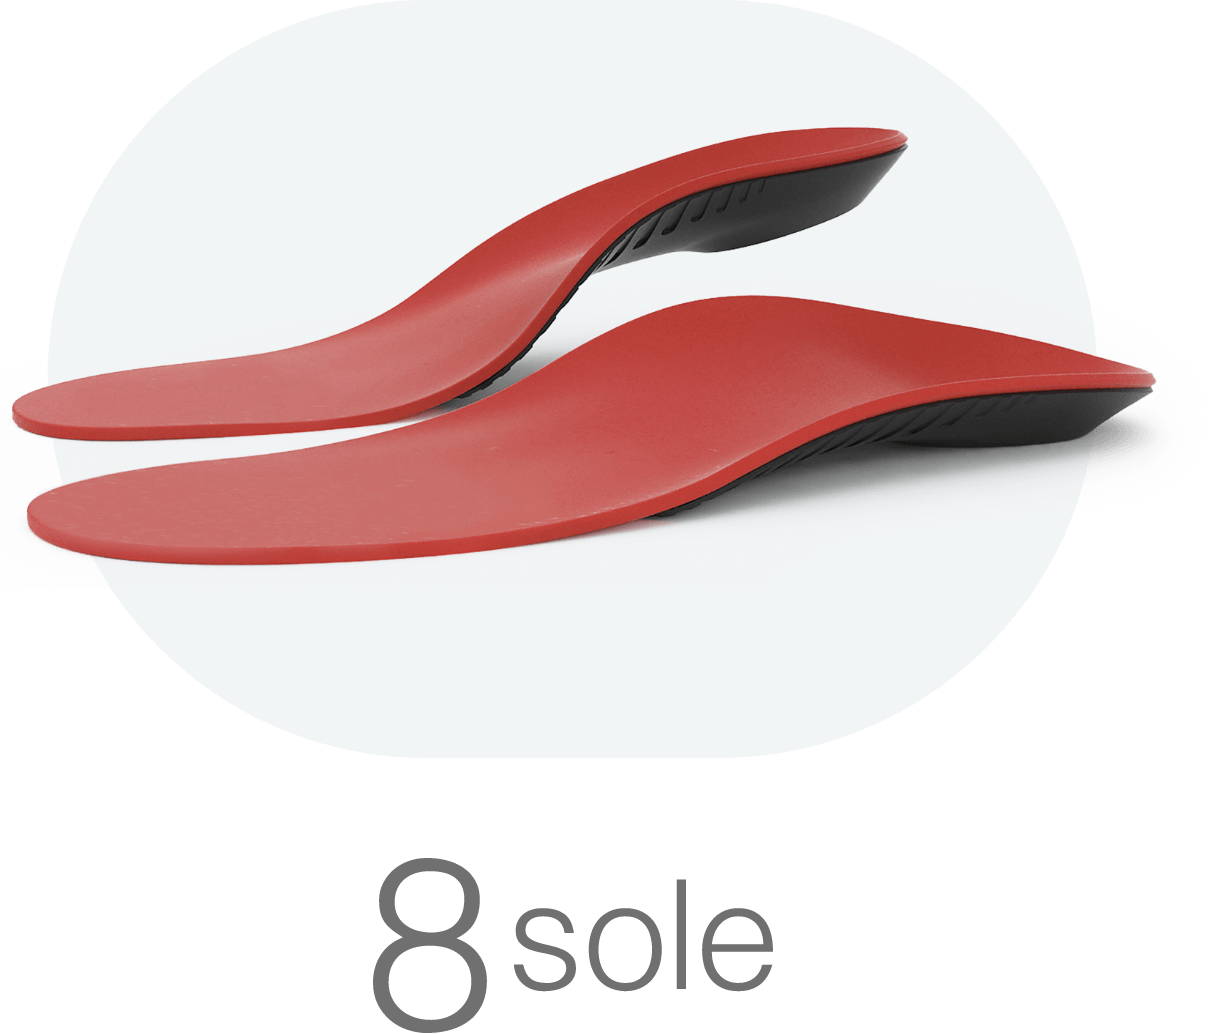 custom orthotic insoles with 8sole logo